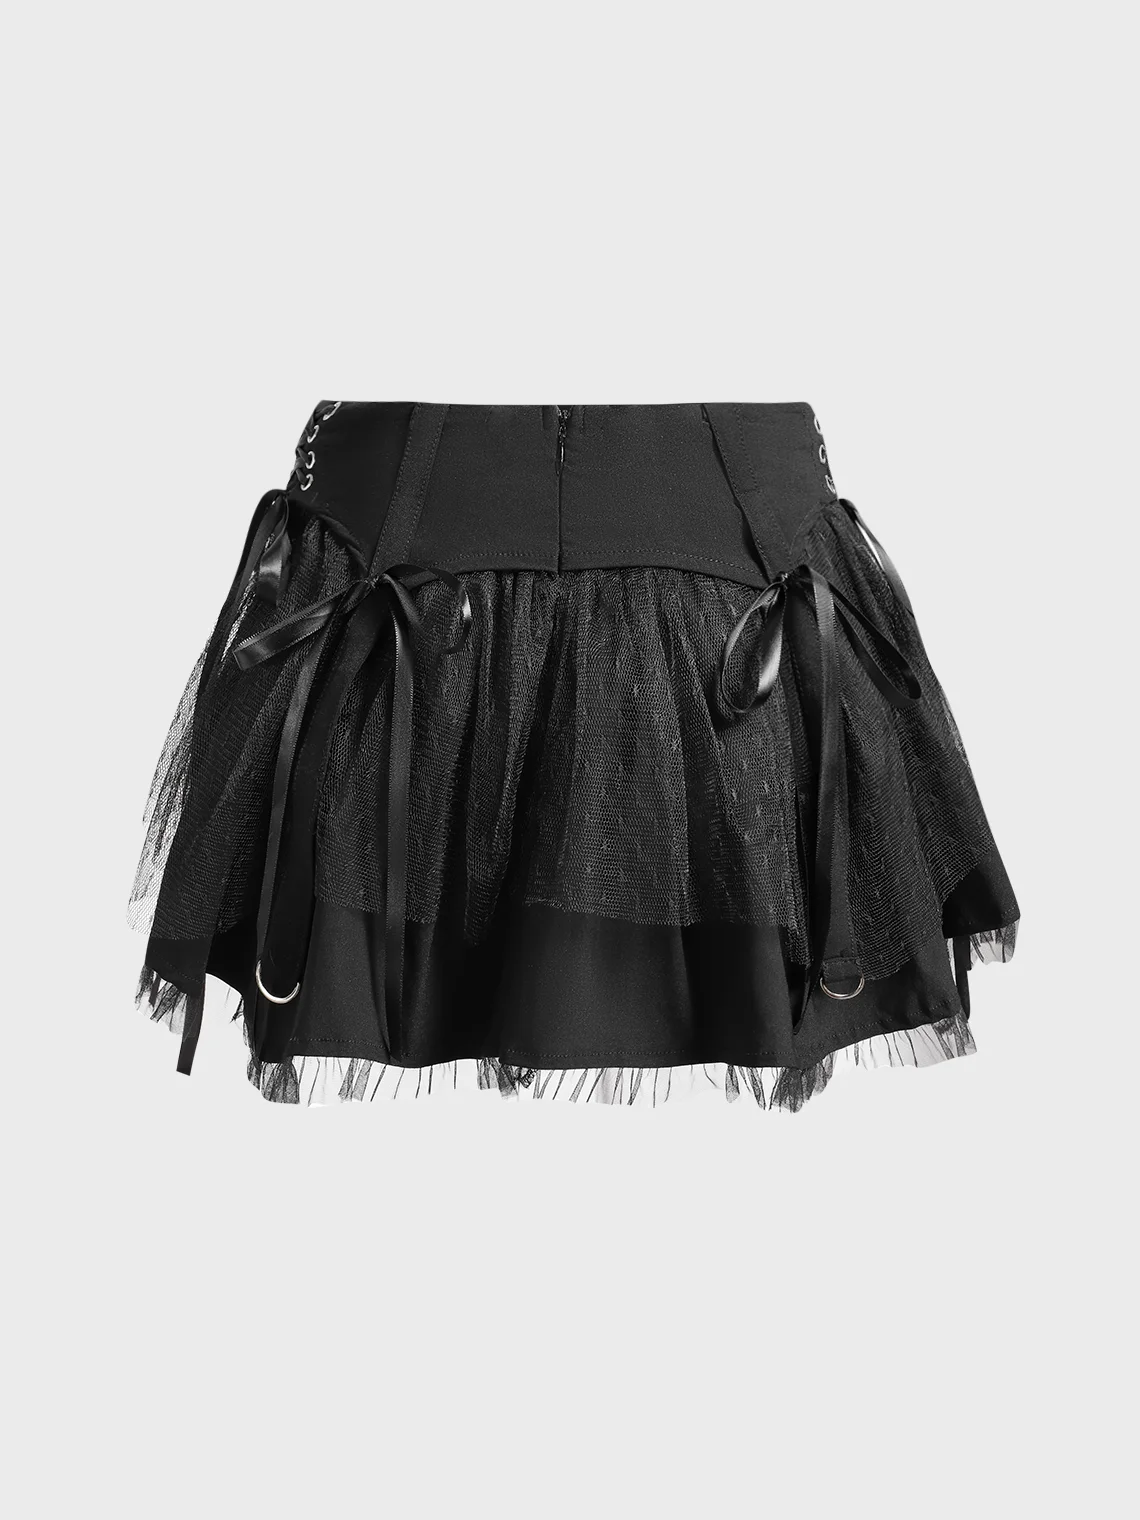 【Final Sale】Punk Black Sleated Lace up Bottom Skirt